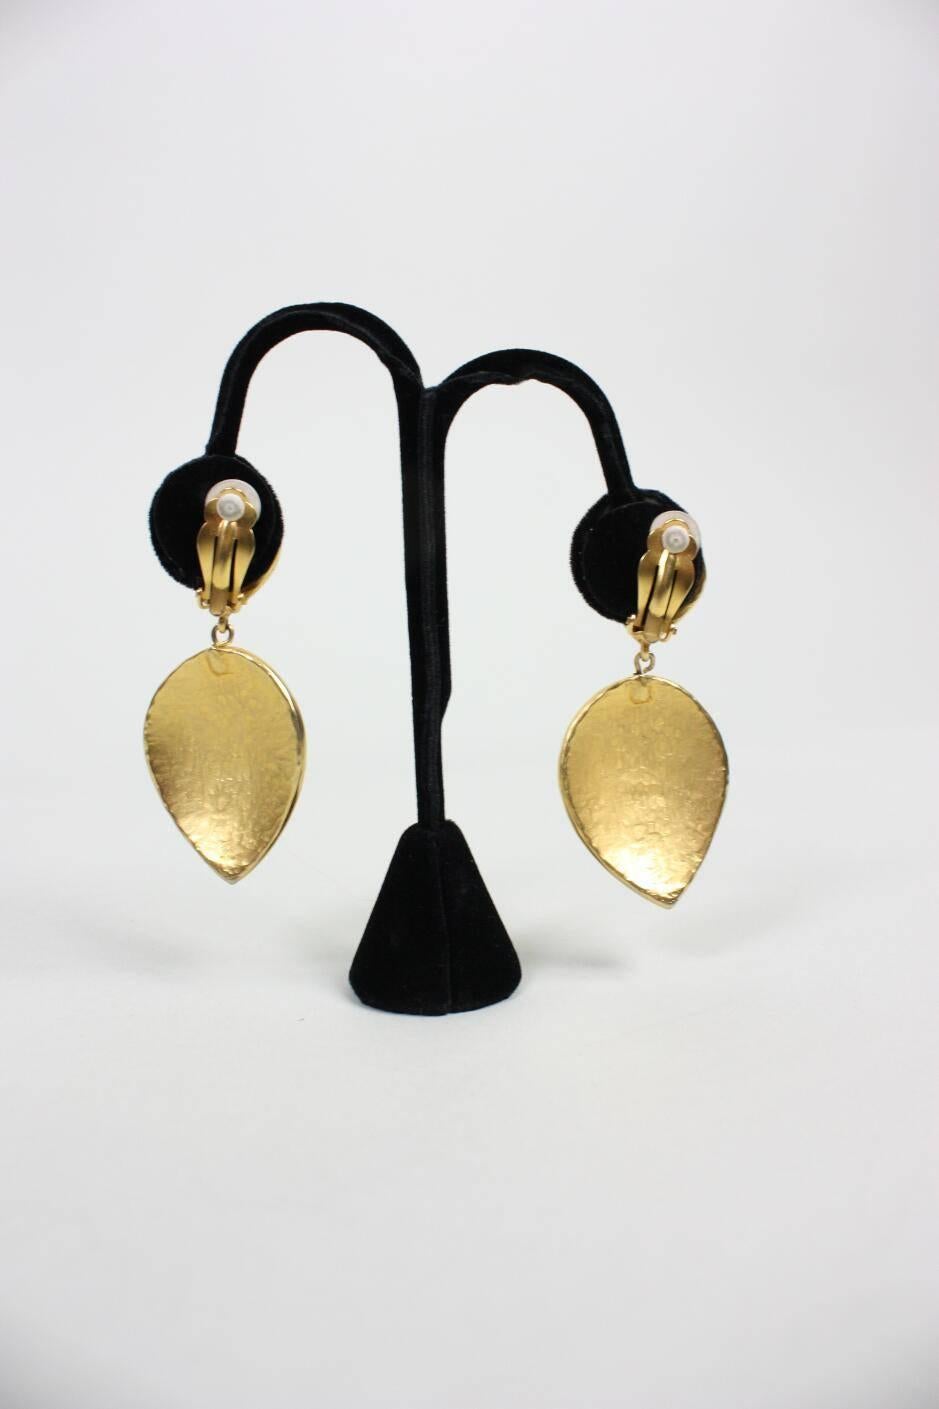 Vintage earrings from Karl Lagerfeld likely date to the 1980's and are made of gold-toned metal.  Clip backs.

Measurements

Overall Length: 2 3/4